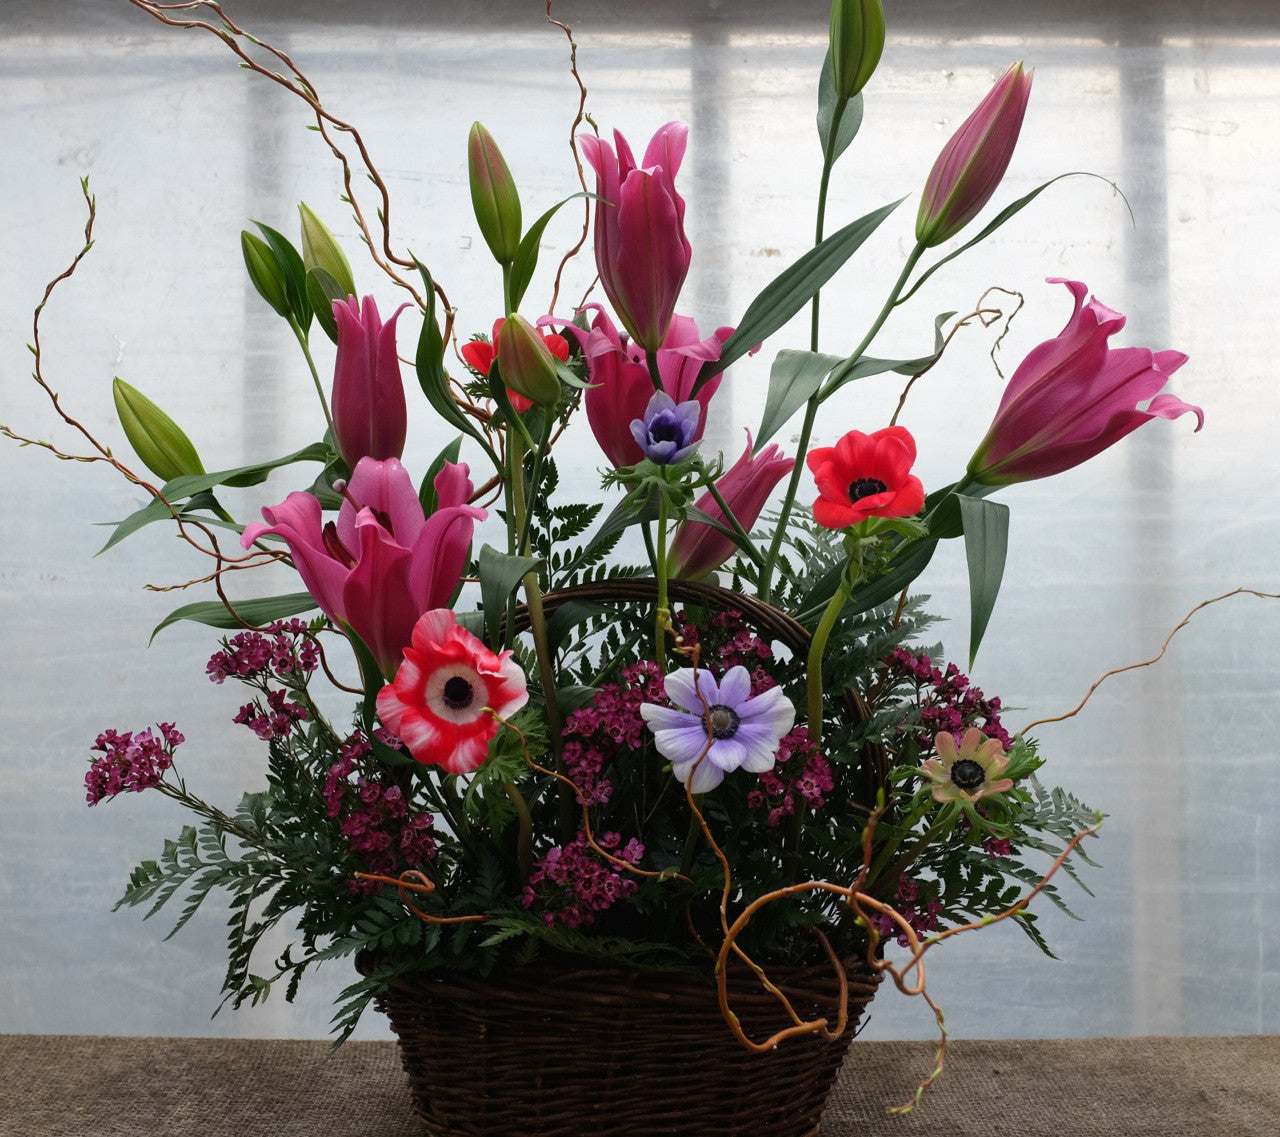 Granard Funeral Basket with Lilies and Anemones. Designed by Michler's Florist in Lexington, KY